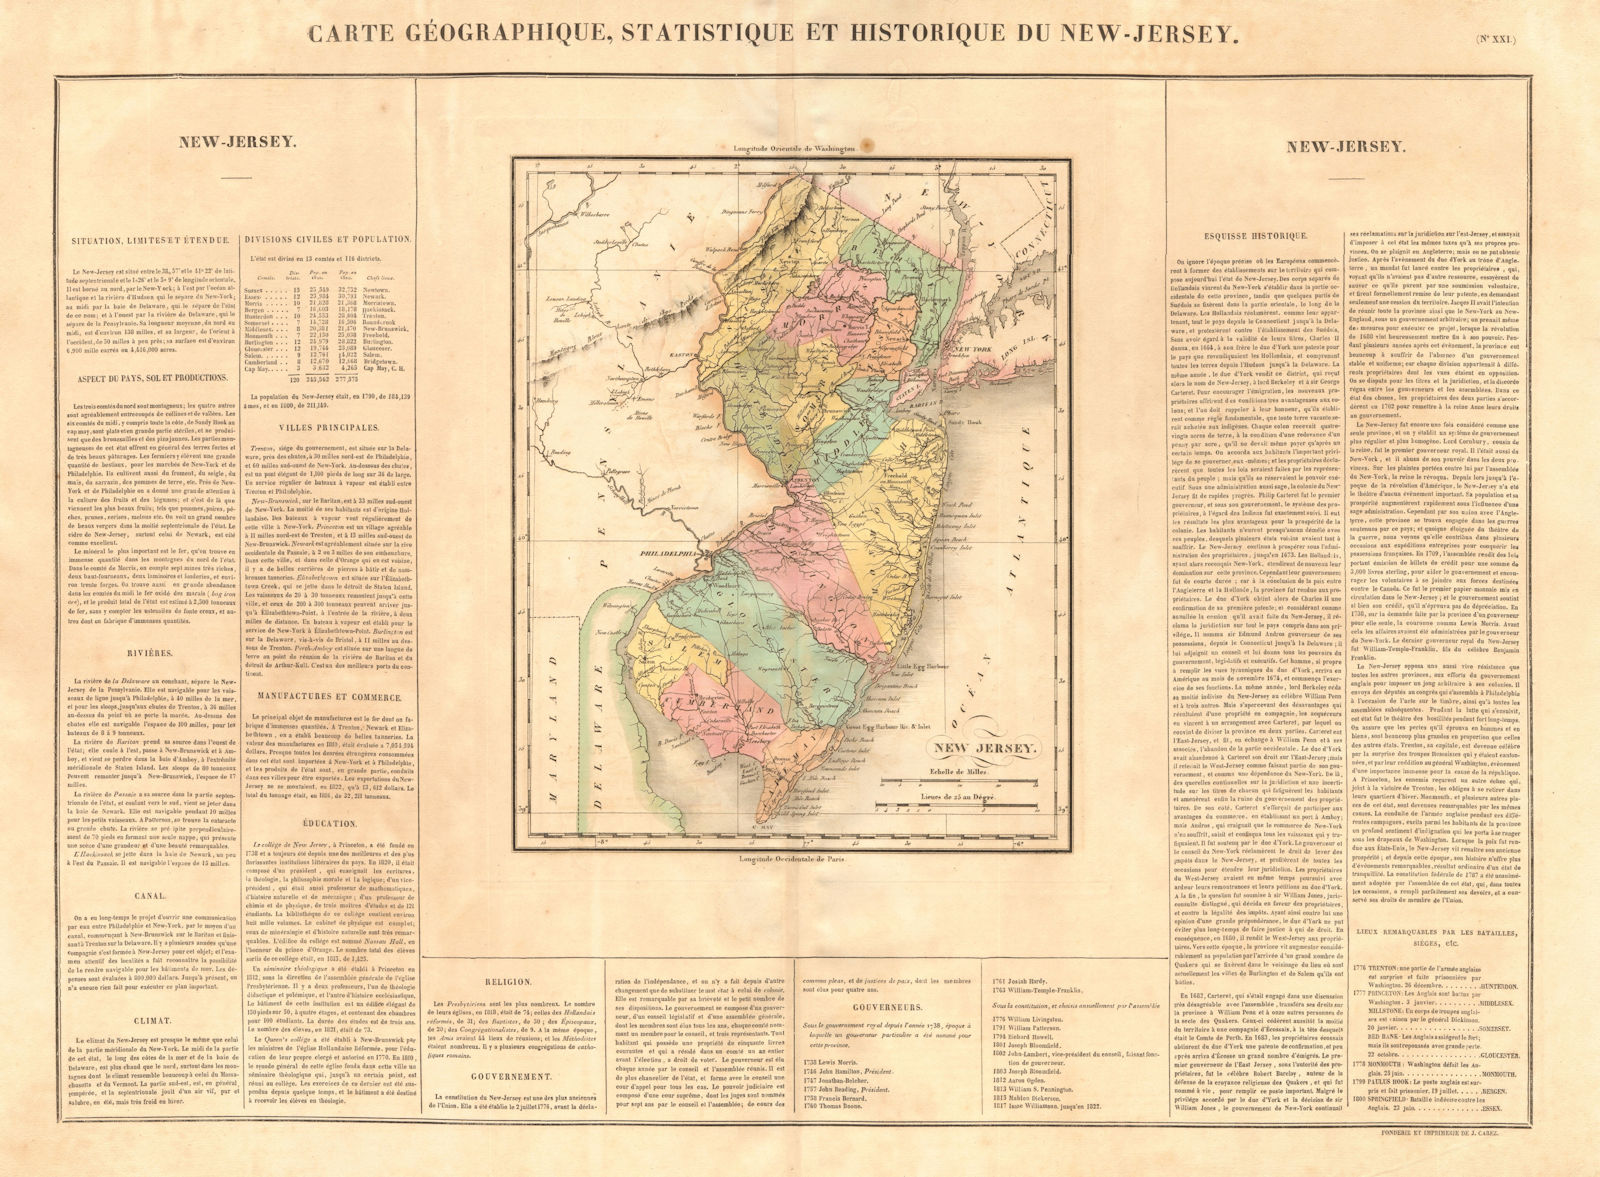 Associate Product New Jersey antique state map. Counties. BUCHON 1825 old plan chart